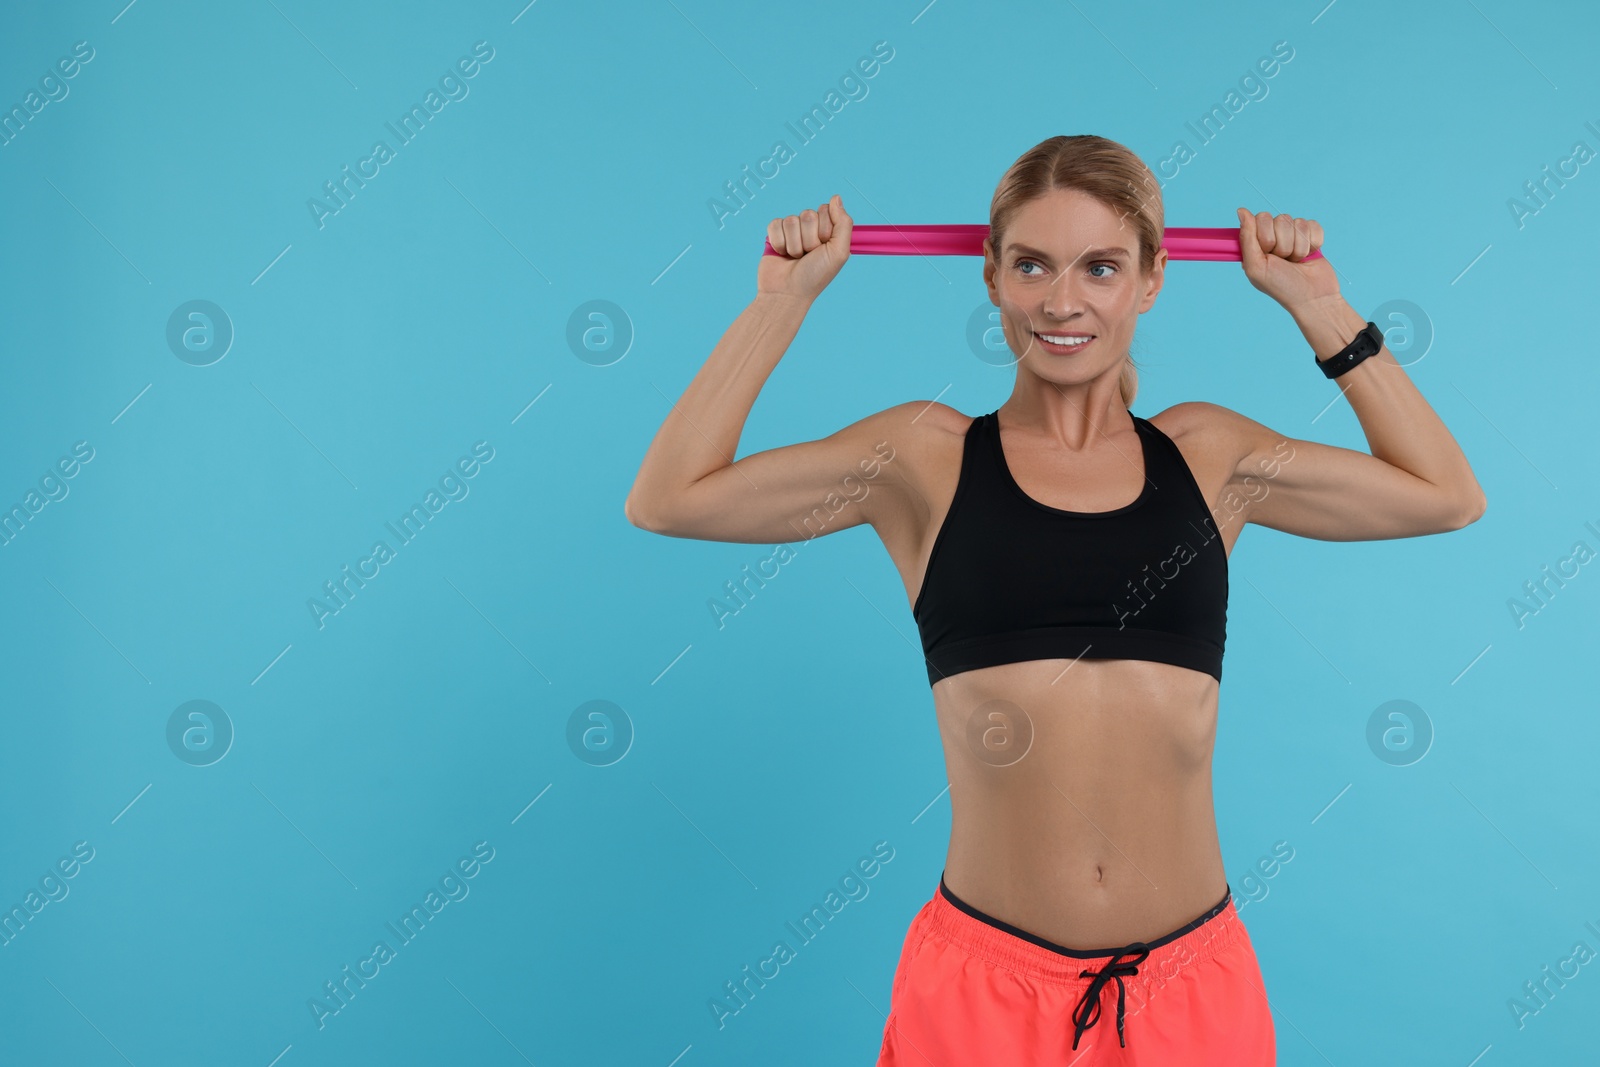 Photo of Woman exercising with elastic resistance band on light blue background. Space for text